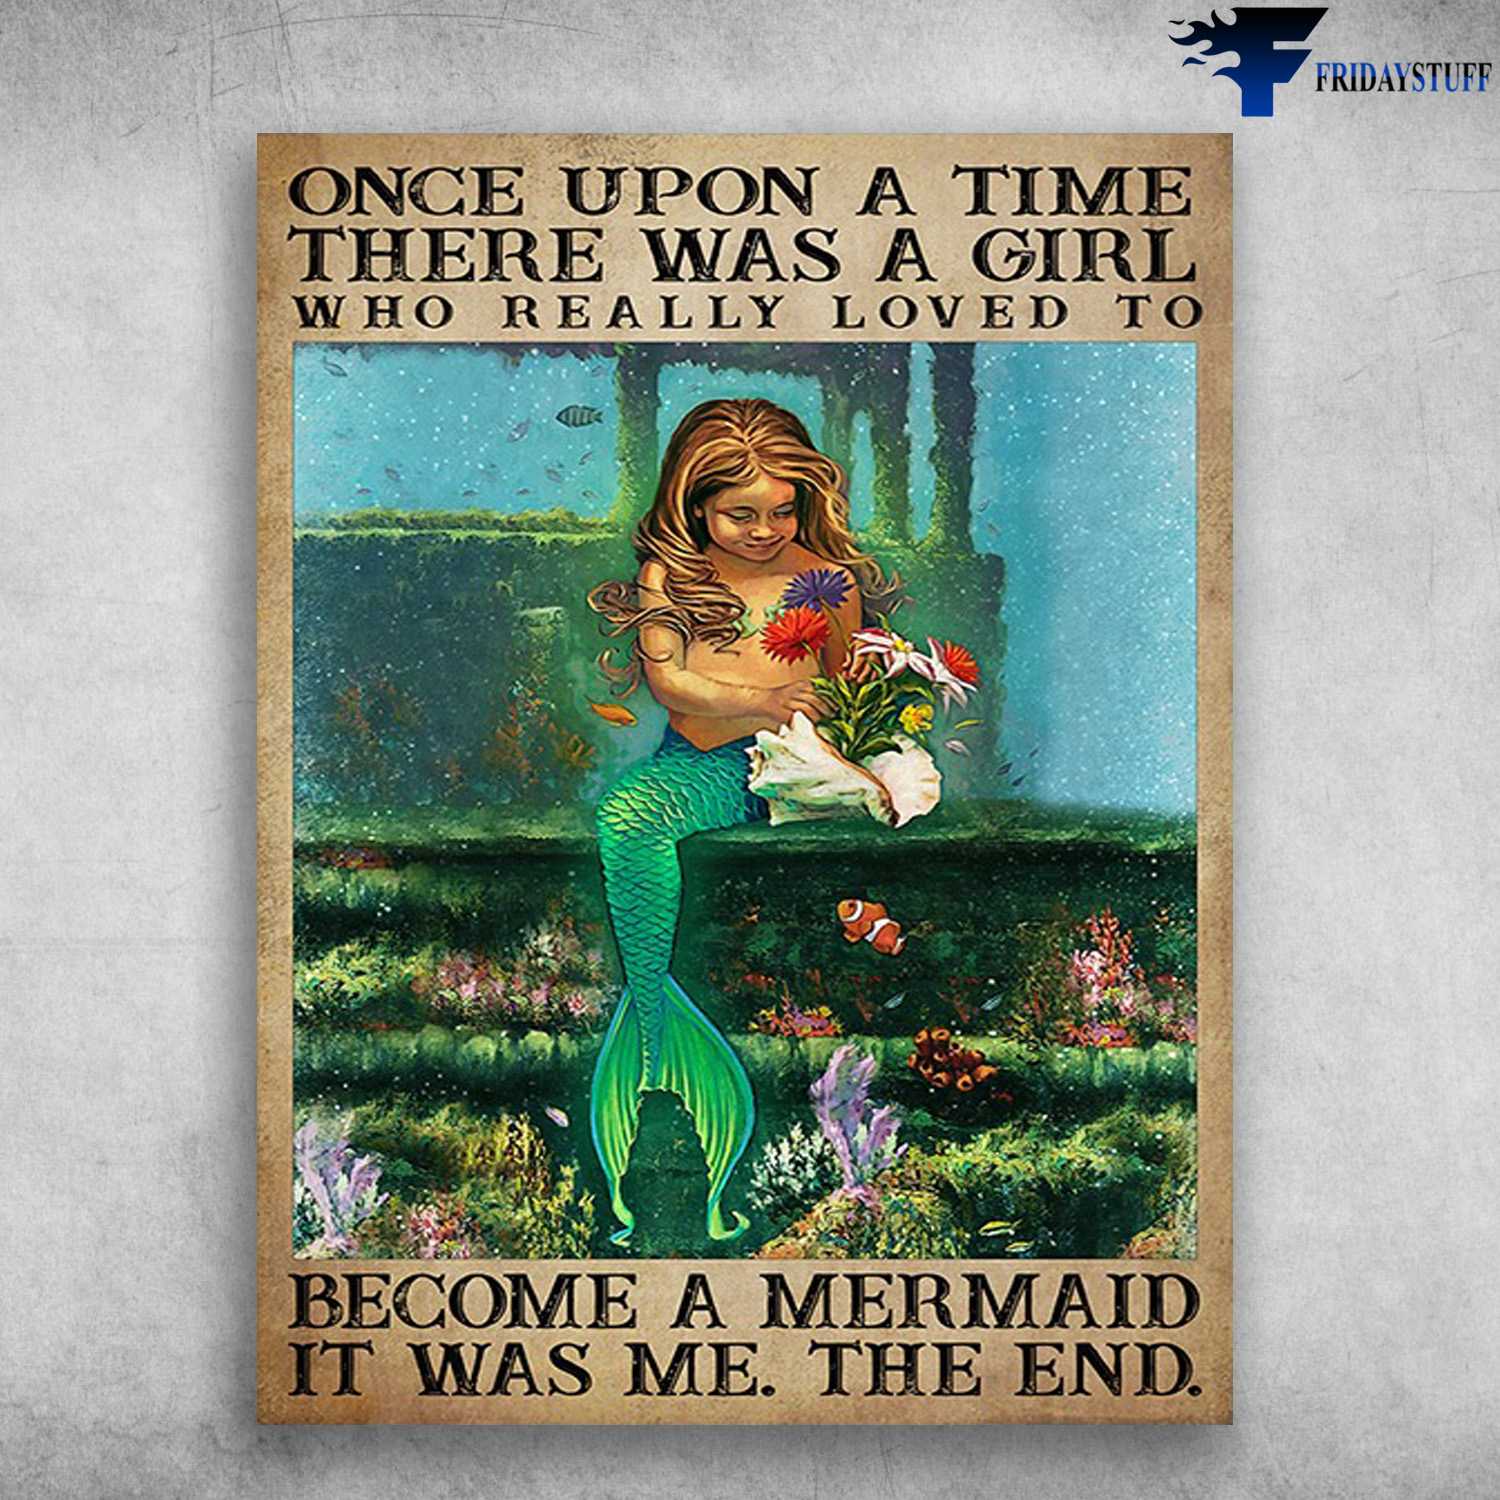 Marmaid Poster, Flower Girl - Once Upon A Time, There Was A Girl, Who Really Loved To Become A Marmaid, It Was Me, The End